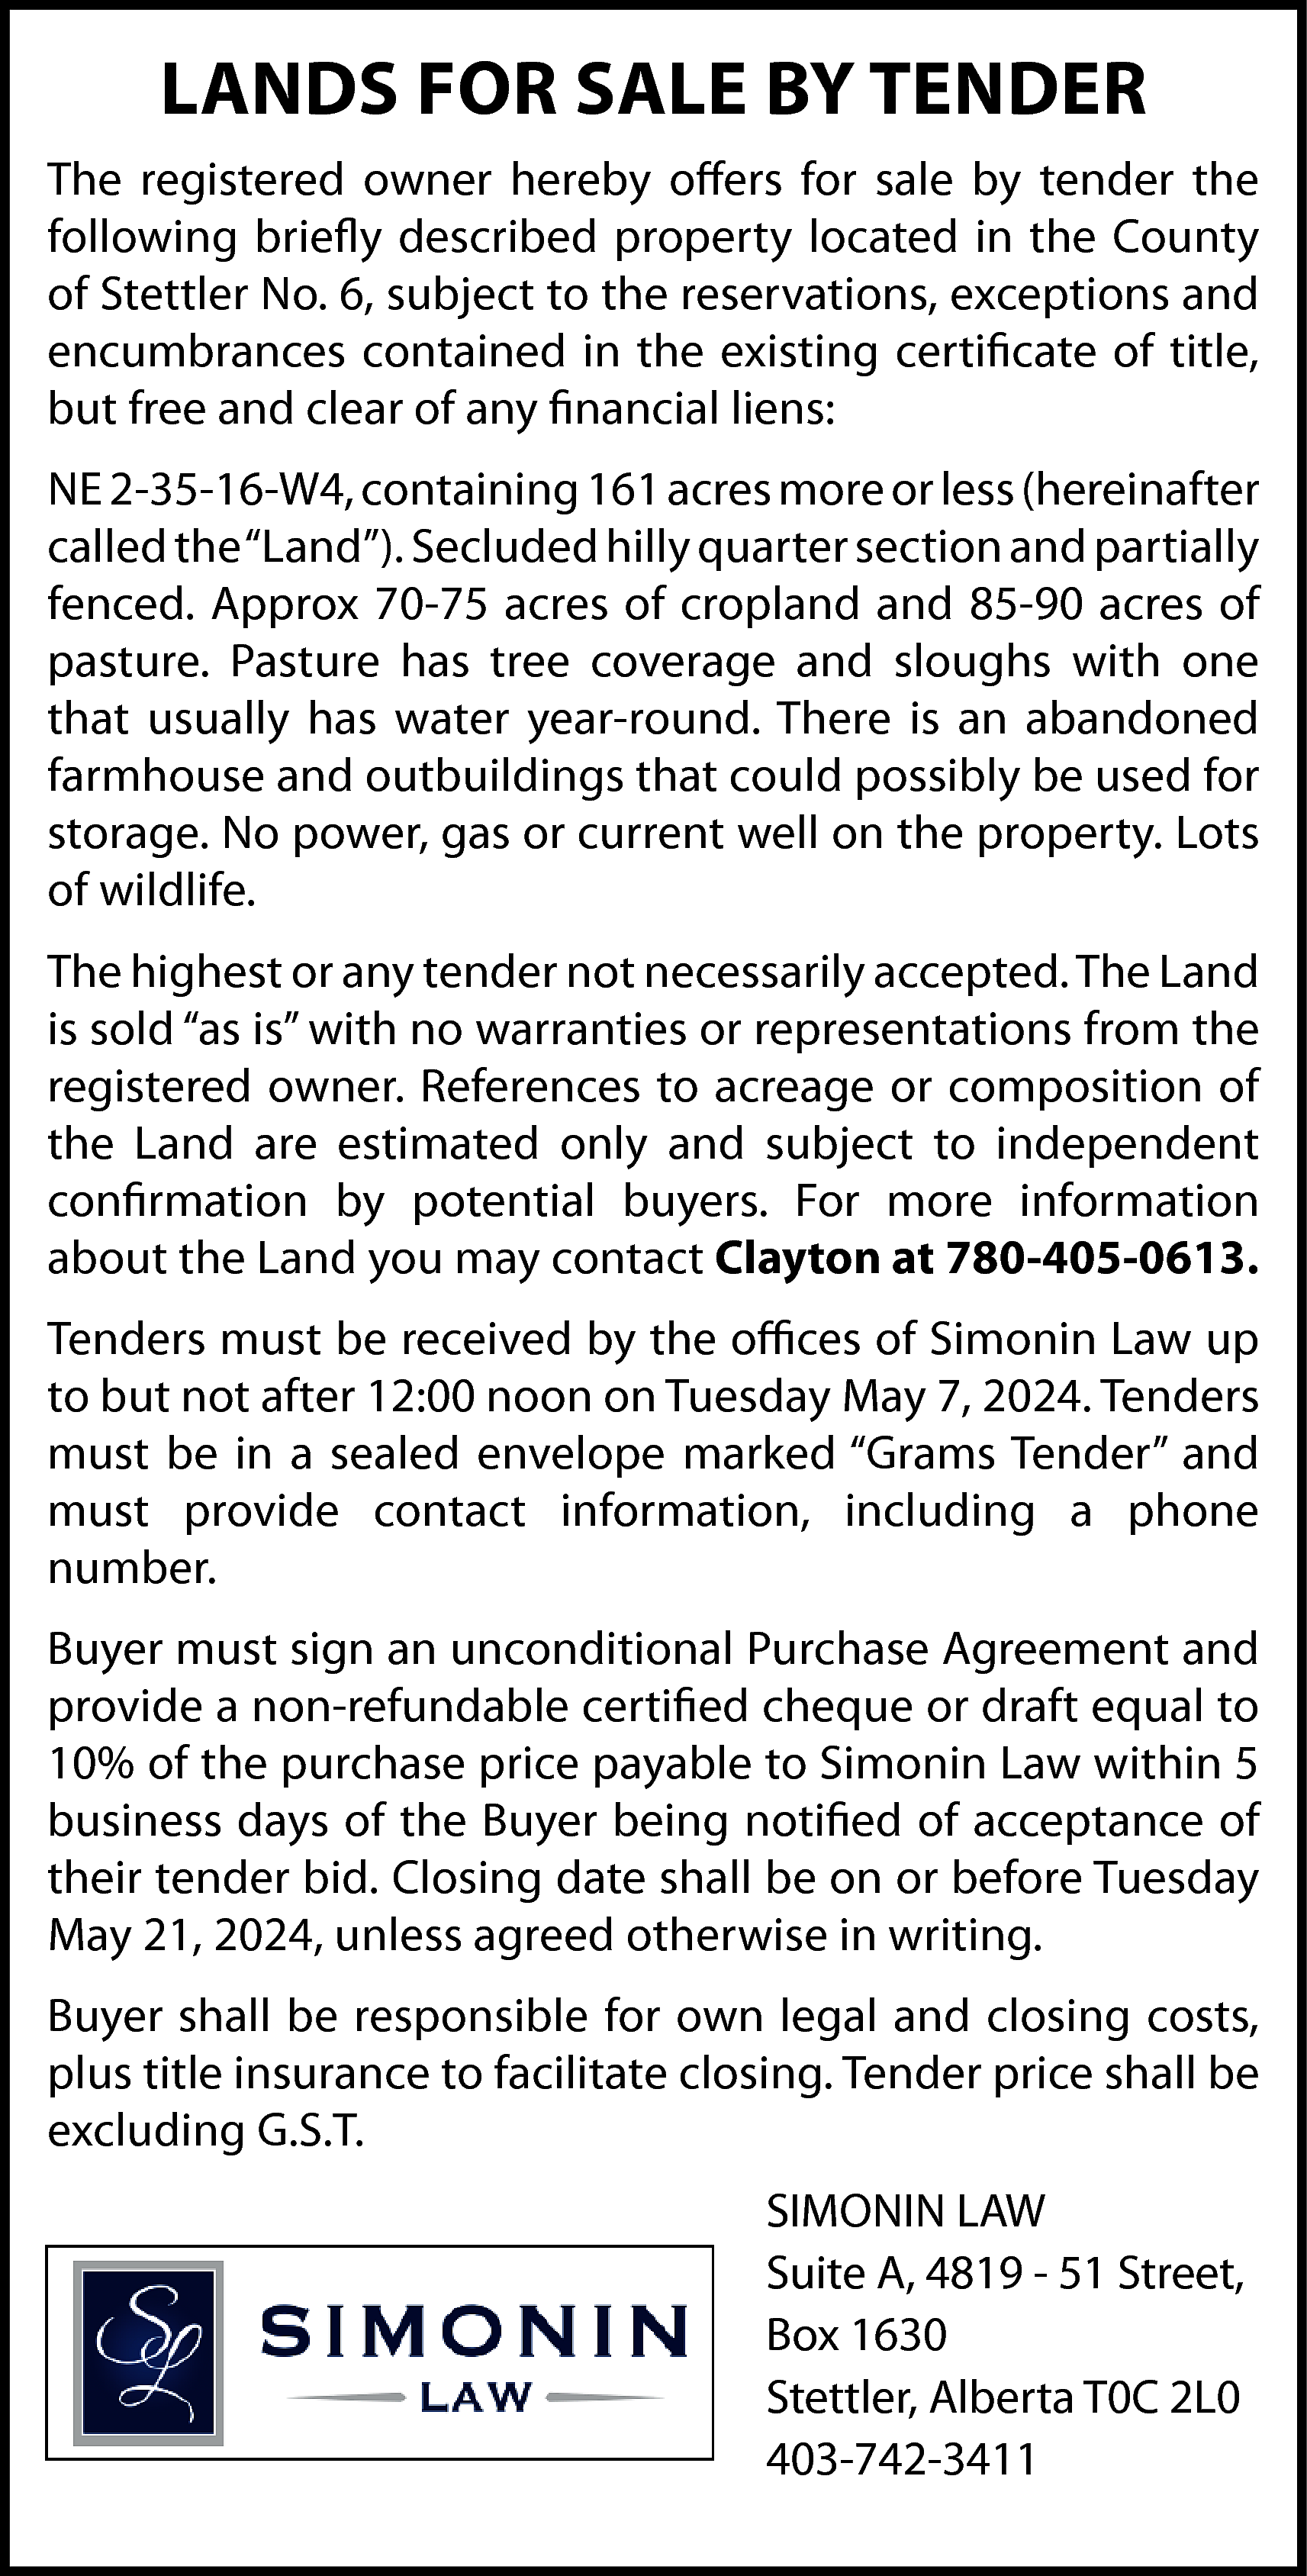 LANDS FOR SALE BY TENDER  LANDS FOR SALE BY TENDER  The registered owner hereby offers for sale by tender the  following briefly described property located in the County  of Stettler No. 6, subject to the reservations, exceptions and  encumbrances contained in the existing certificate of title,  but free and clear of any financial liens:  NE 2-35-16-W4, containing 161 acres more or less (hereinafter  called the “Land”). Secluded hilly quarter section and partially  fenced. Approx 70-75 acres of cropland and 85-90 acres of  pasture. Pasture has tree coverage and sloughs with one  that usually has water year-round. There is an abandoned  farmhouse and outbuildings that could possibly be used for  storage. No power, gas or current well on the property. Lots  of wildlife.  The highest or any tender not necessarily accepted. The Land  is sold “as is” with no warranties or representations from the  registered owner. References to acreage or composition of  the Land are estimated only and subject to independent  confirmation by potential buyers. For more information  about the Land you may contact Clayton at 780-405-0613.  Tenders must be received by the offices of Simonin Law up  to but not after 12:00 noon on Tuesday May 7, 2024. Tenders  must be in a sealed envelope marked “Grams Tender” and  must provide contact information, including a phone  number.  Buyer must sign an unconditional Purchase Agreement and  provide a non-refundable certified cheque or draft equal to  10% of the purchase price payable to Simonin Law within 5  business days of the Buyer being notified of acceptance of  their tender bid. Closing date shall be on or before Tuesday  May 21, 2024, unless agreed otherwise in writing.  Buyer shall be responsible for own legal and closing costs,  plus title insurance to facilitate closing. Tender price shall be  excluding G.S.T.  SIMONIN LAW  Suite A, 4819 - 51 Street,  Box 1630  Stettler, Alberta T0C 2L0  403-742-3411    